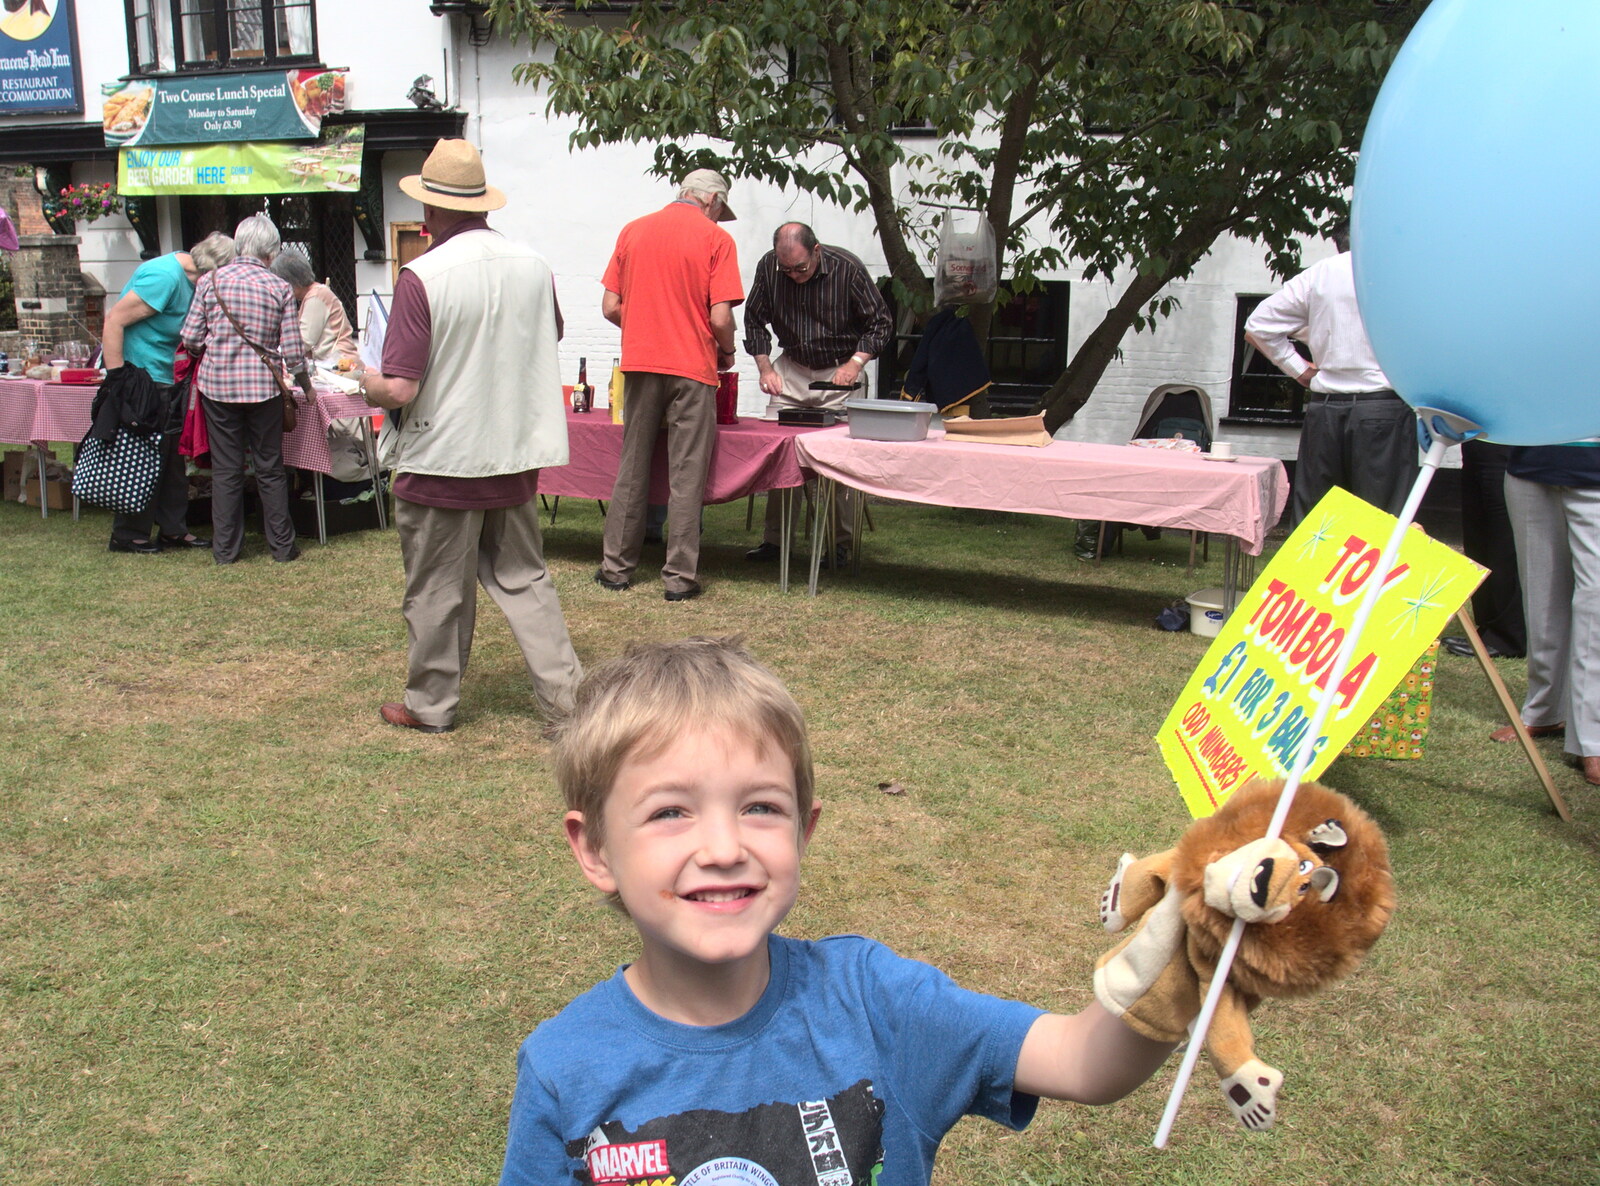 Fred's got a lion hand-puppet from A Busy Day and a Church Fair, Diss, Norfolk - 28th June 2014